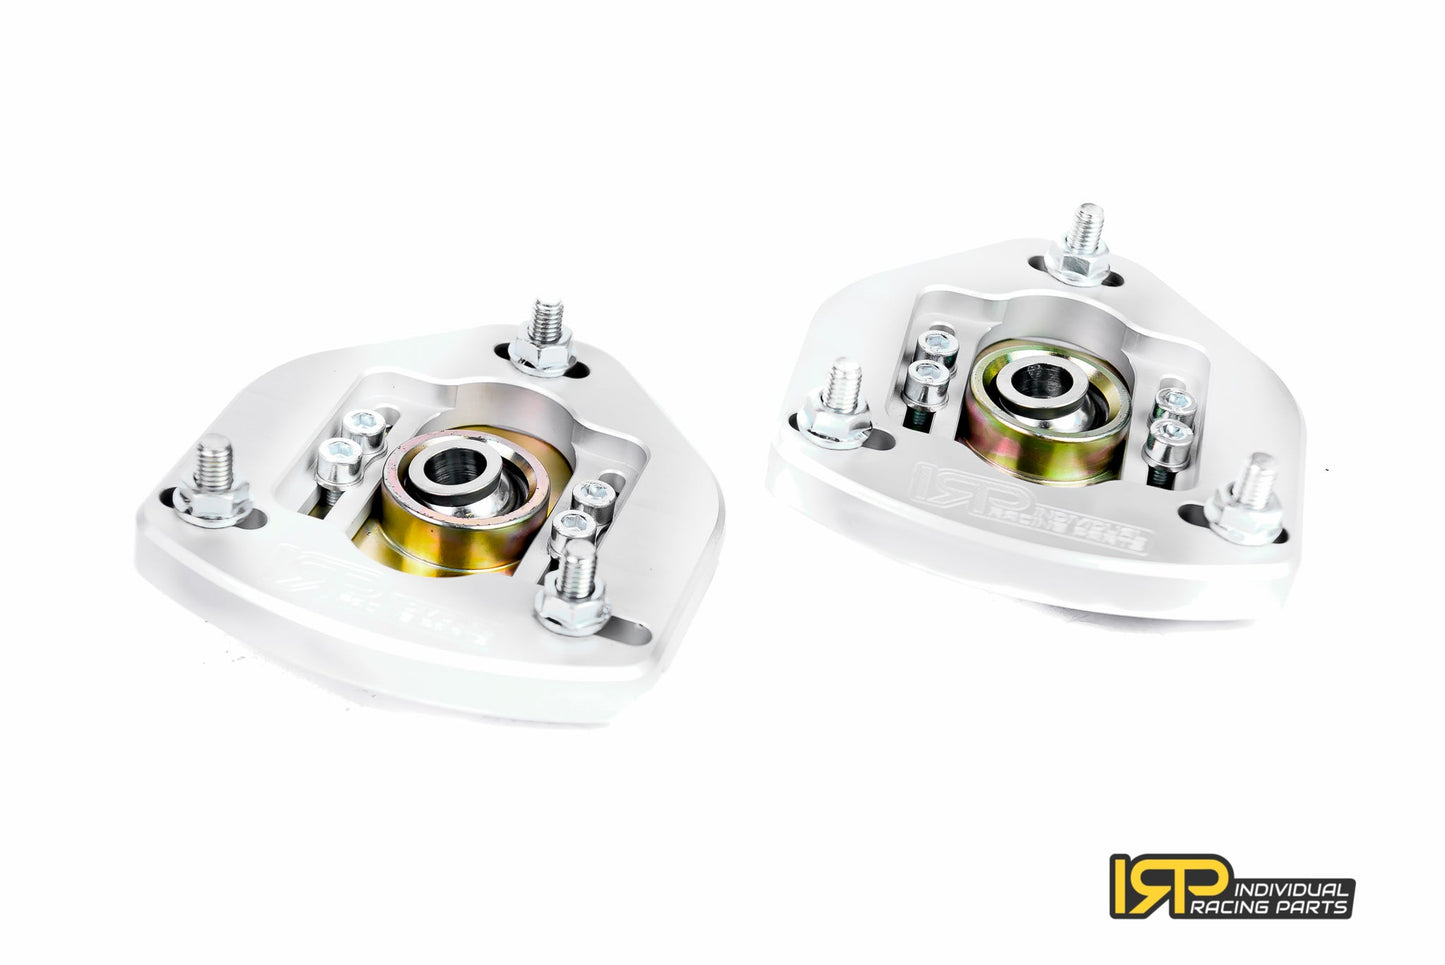 IRP - Adjustable camber caster plates (for coilovers) BMW E30, E34 (IRPACCP-30C)